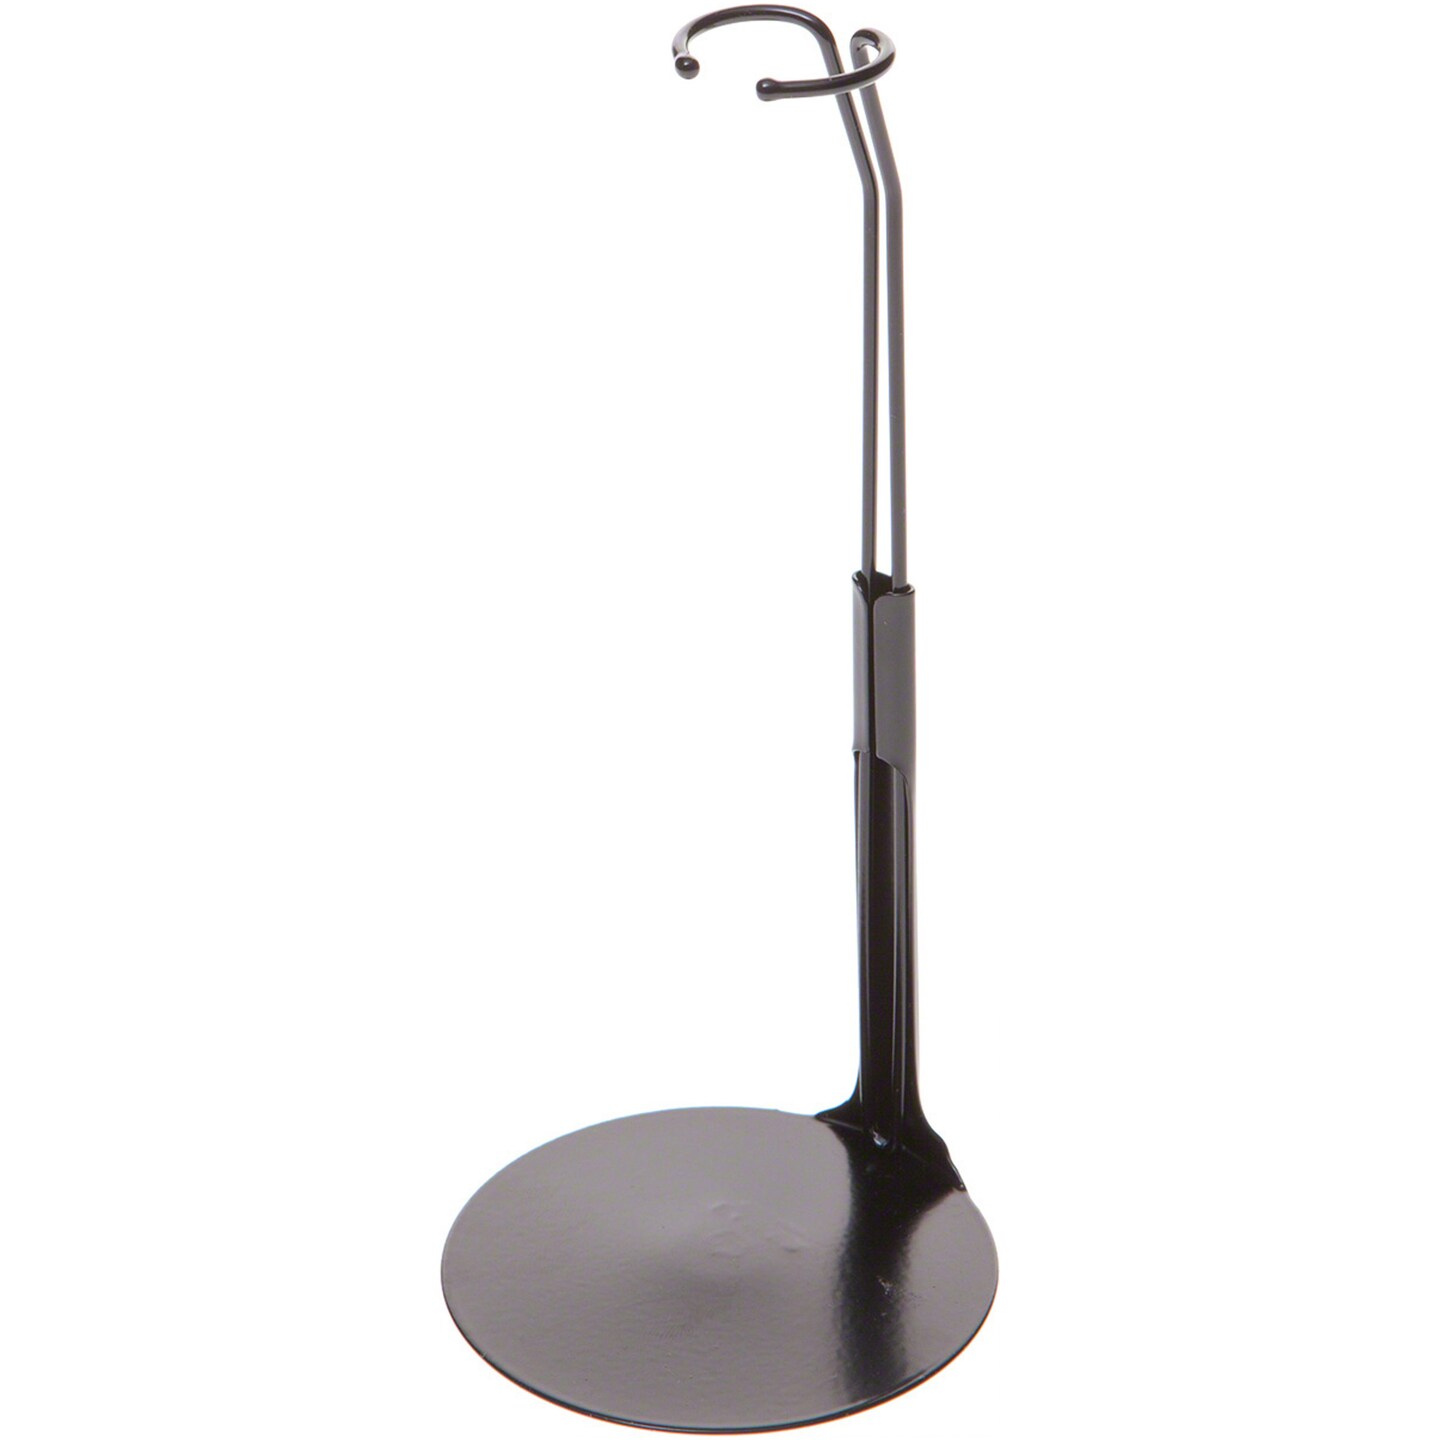 Kaiser 2275 Black Adjustable Doll Stand, fits 11 to 12 inch Dolls, waist width adjusts from 0.875 to 1.25 inches